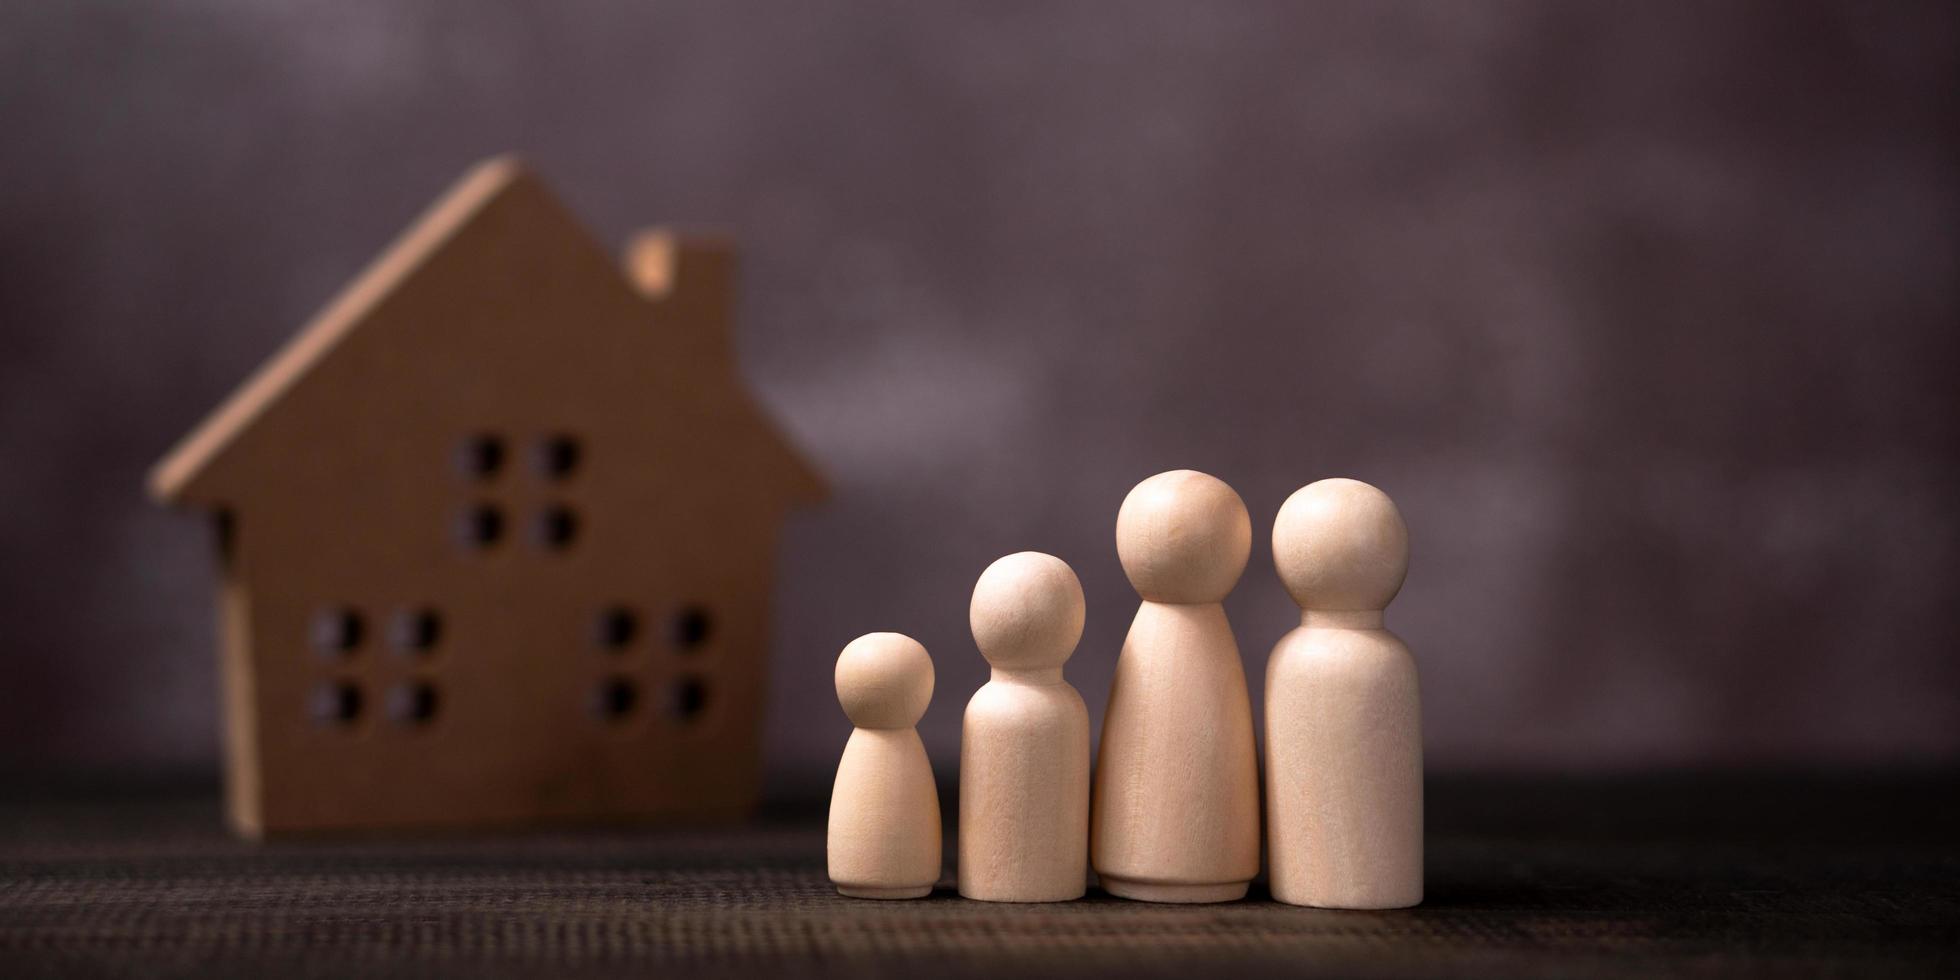 Wooden figures family standing in front of a wooden house. The concept of Protection and safety, Home Security, property insurance and house. photo